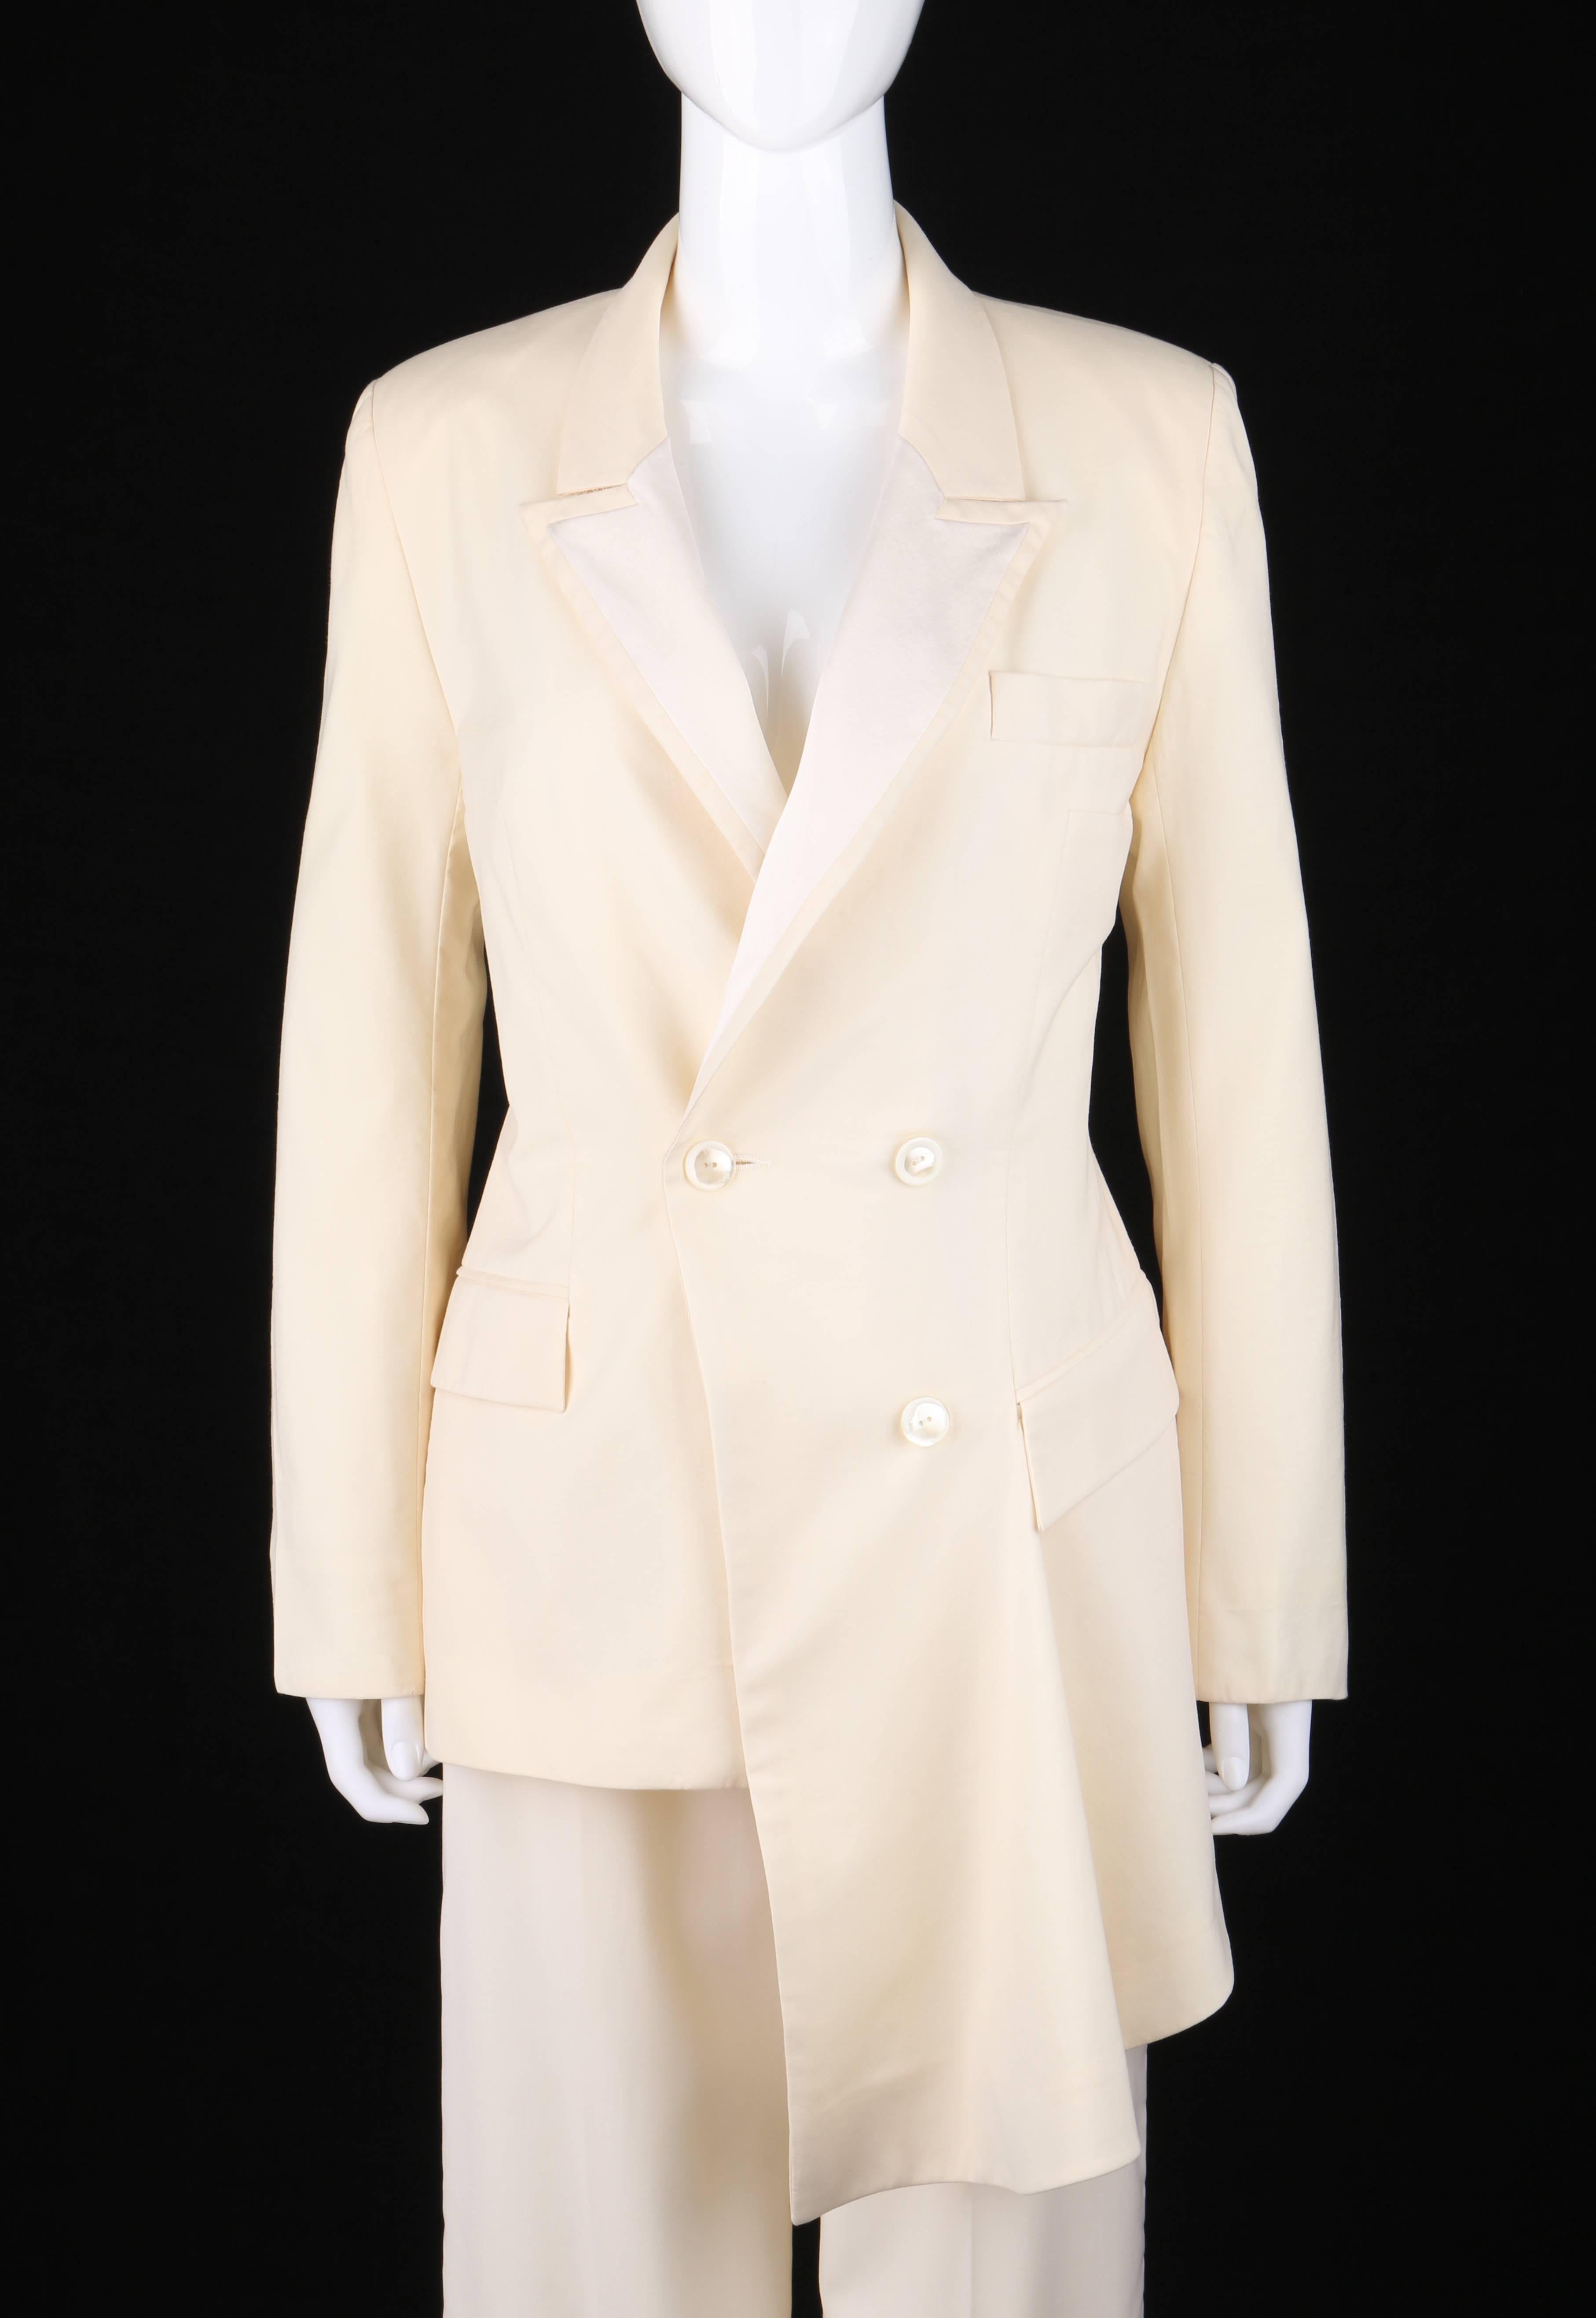 Givenchy Couture Spring/Summer 1999 two piece ivory asymmetrical tuxedo jacket pant suit set designed by Alexander McQueen. Runway look #1. Ivory wool asymmetrical hem jacket. Peak lapel collar with contrasting winter white silk satin detail. Double